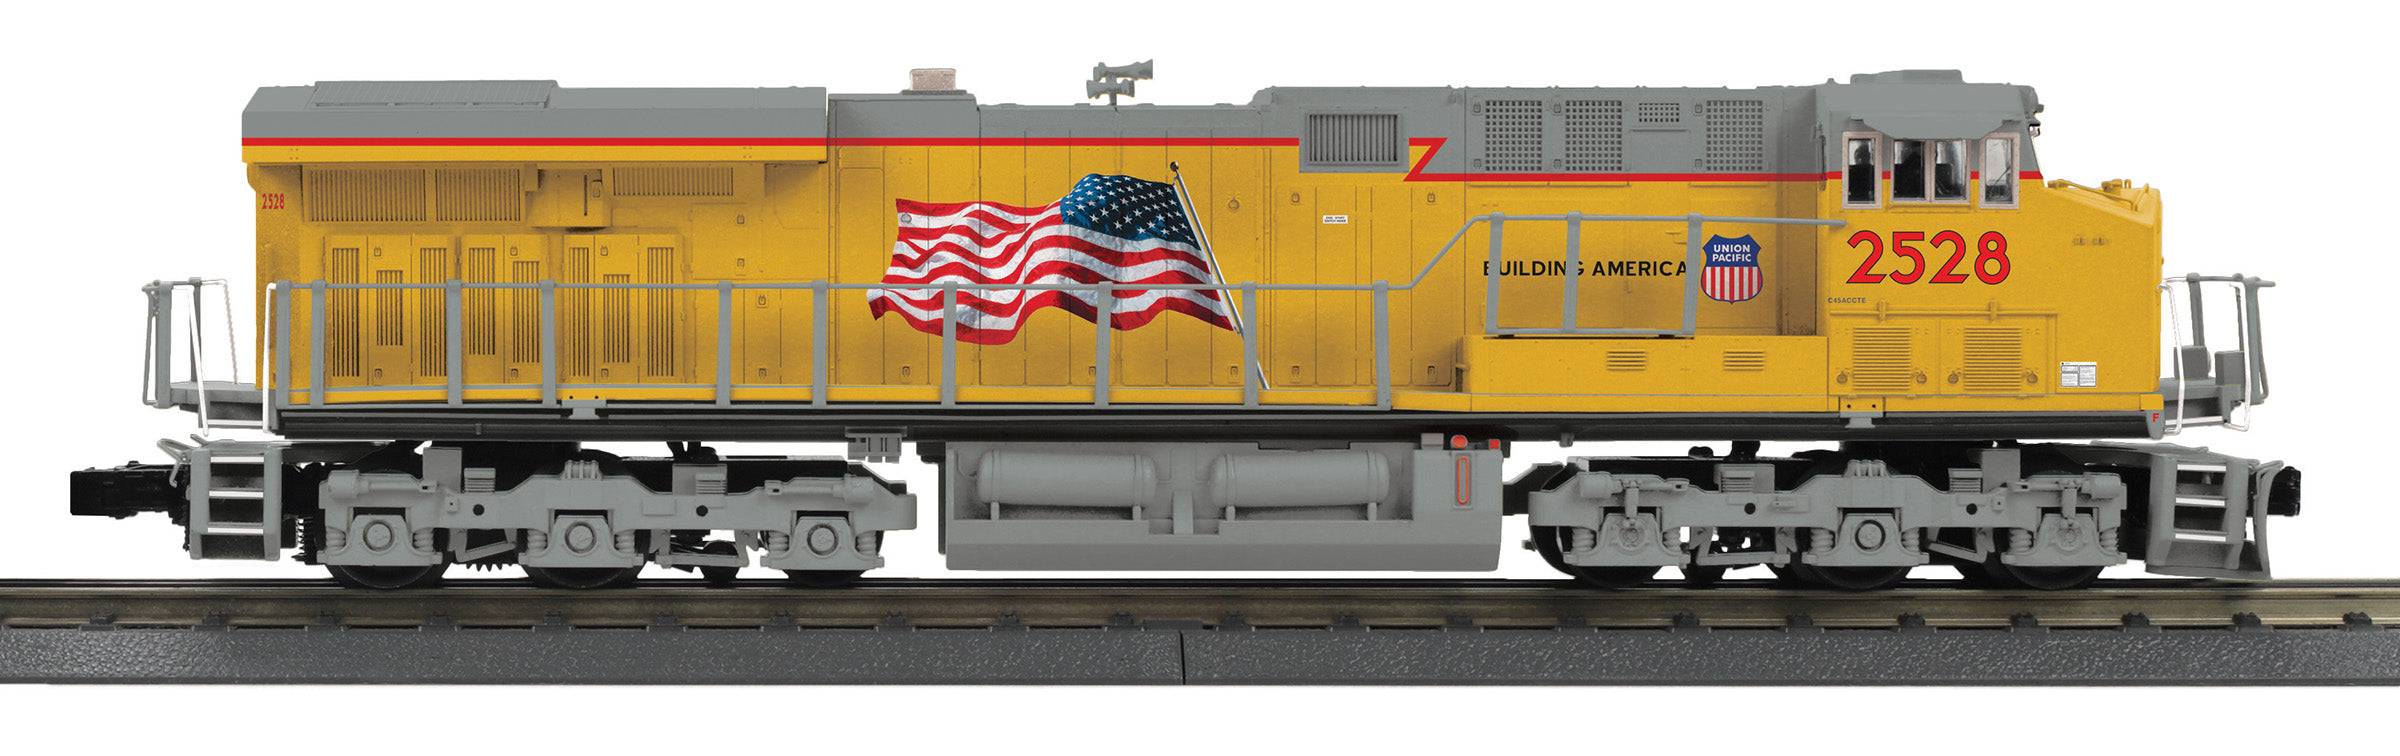 MTH 30-21243-1 - ES44AC Imperial Diesel Engine "Union Pacific" #2528 w/ PS3